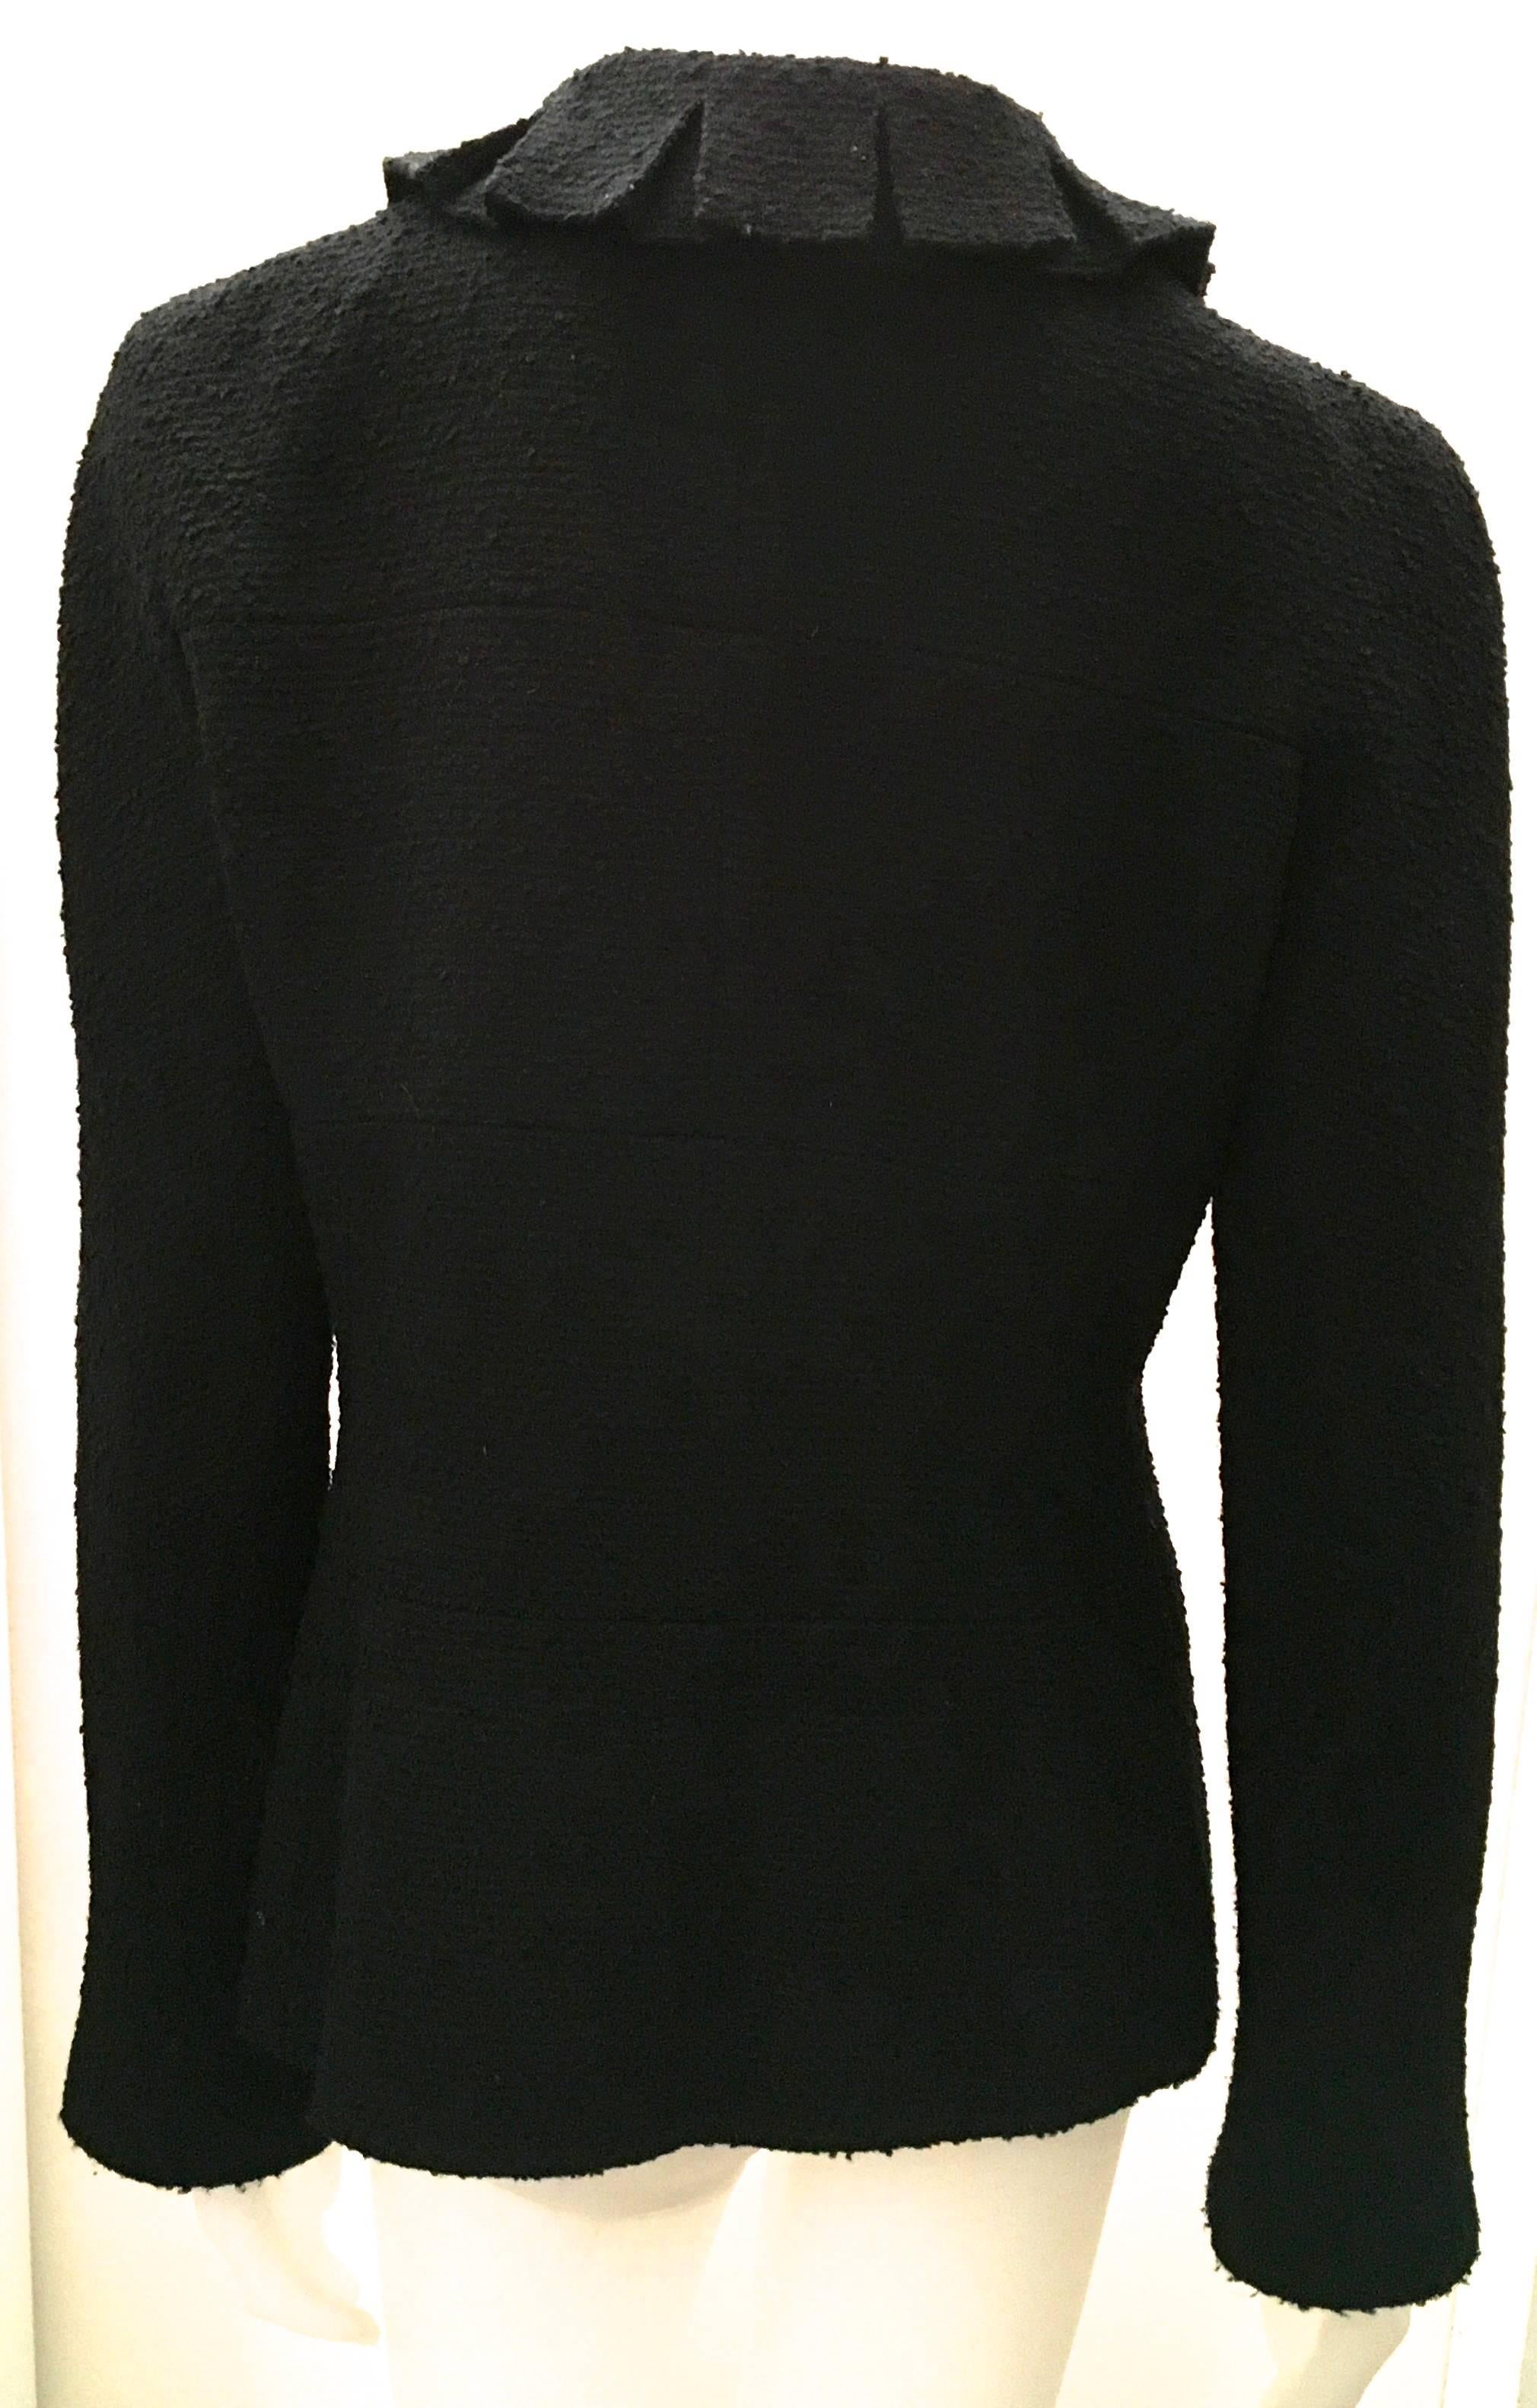 Chanel Black Boucle Jacket In Excellent Condition For Sale In Boca Raton, FL